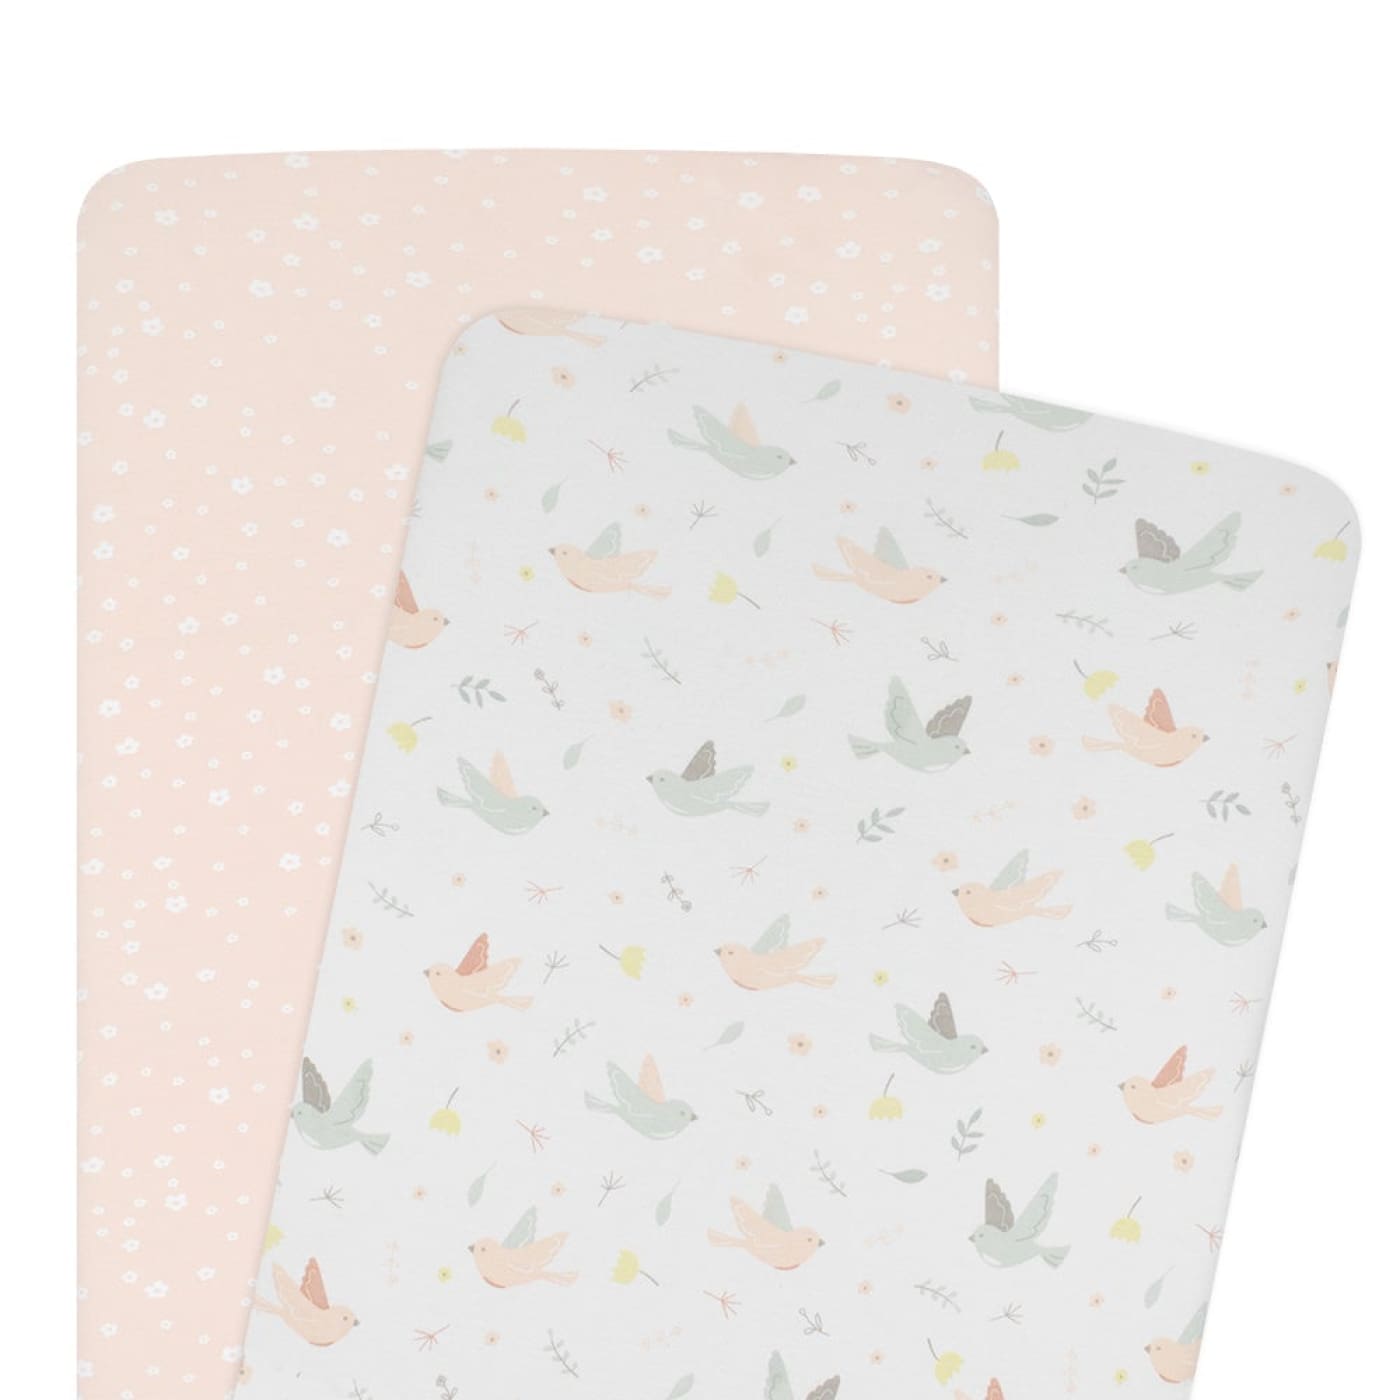 Living Textiles 2-pack Jersey Co-sleeper/Cradle Fitted Sheet - Ava/Blush Floral - Ava/Blush Floral - NURSERY & BEDTIME - BASS/CRADLE/COSLEEP